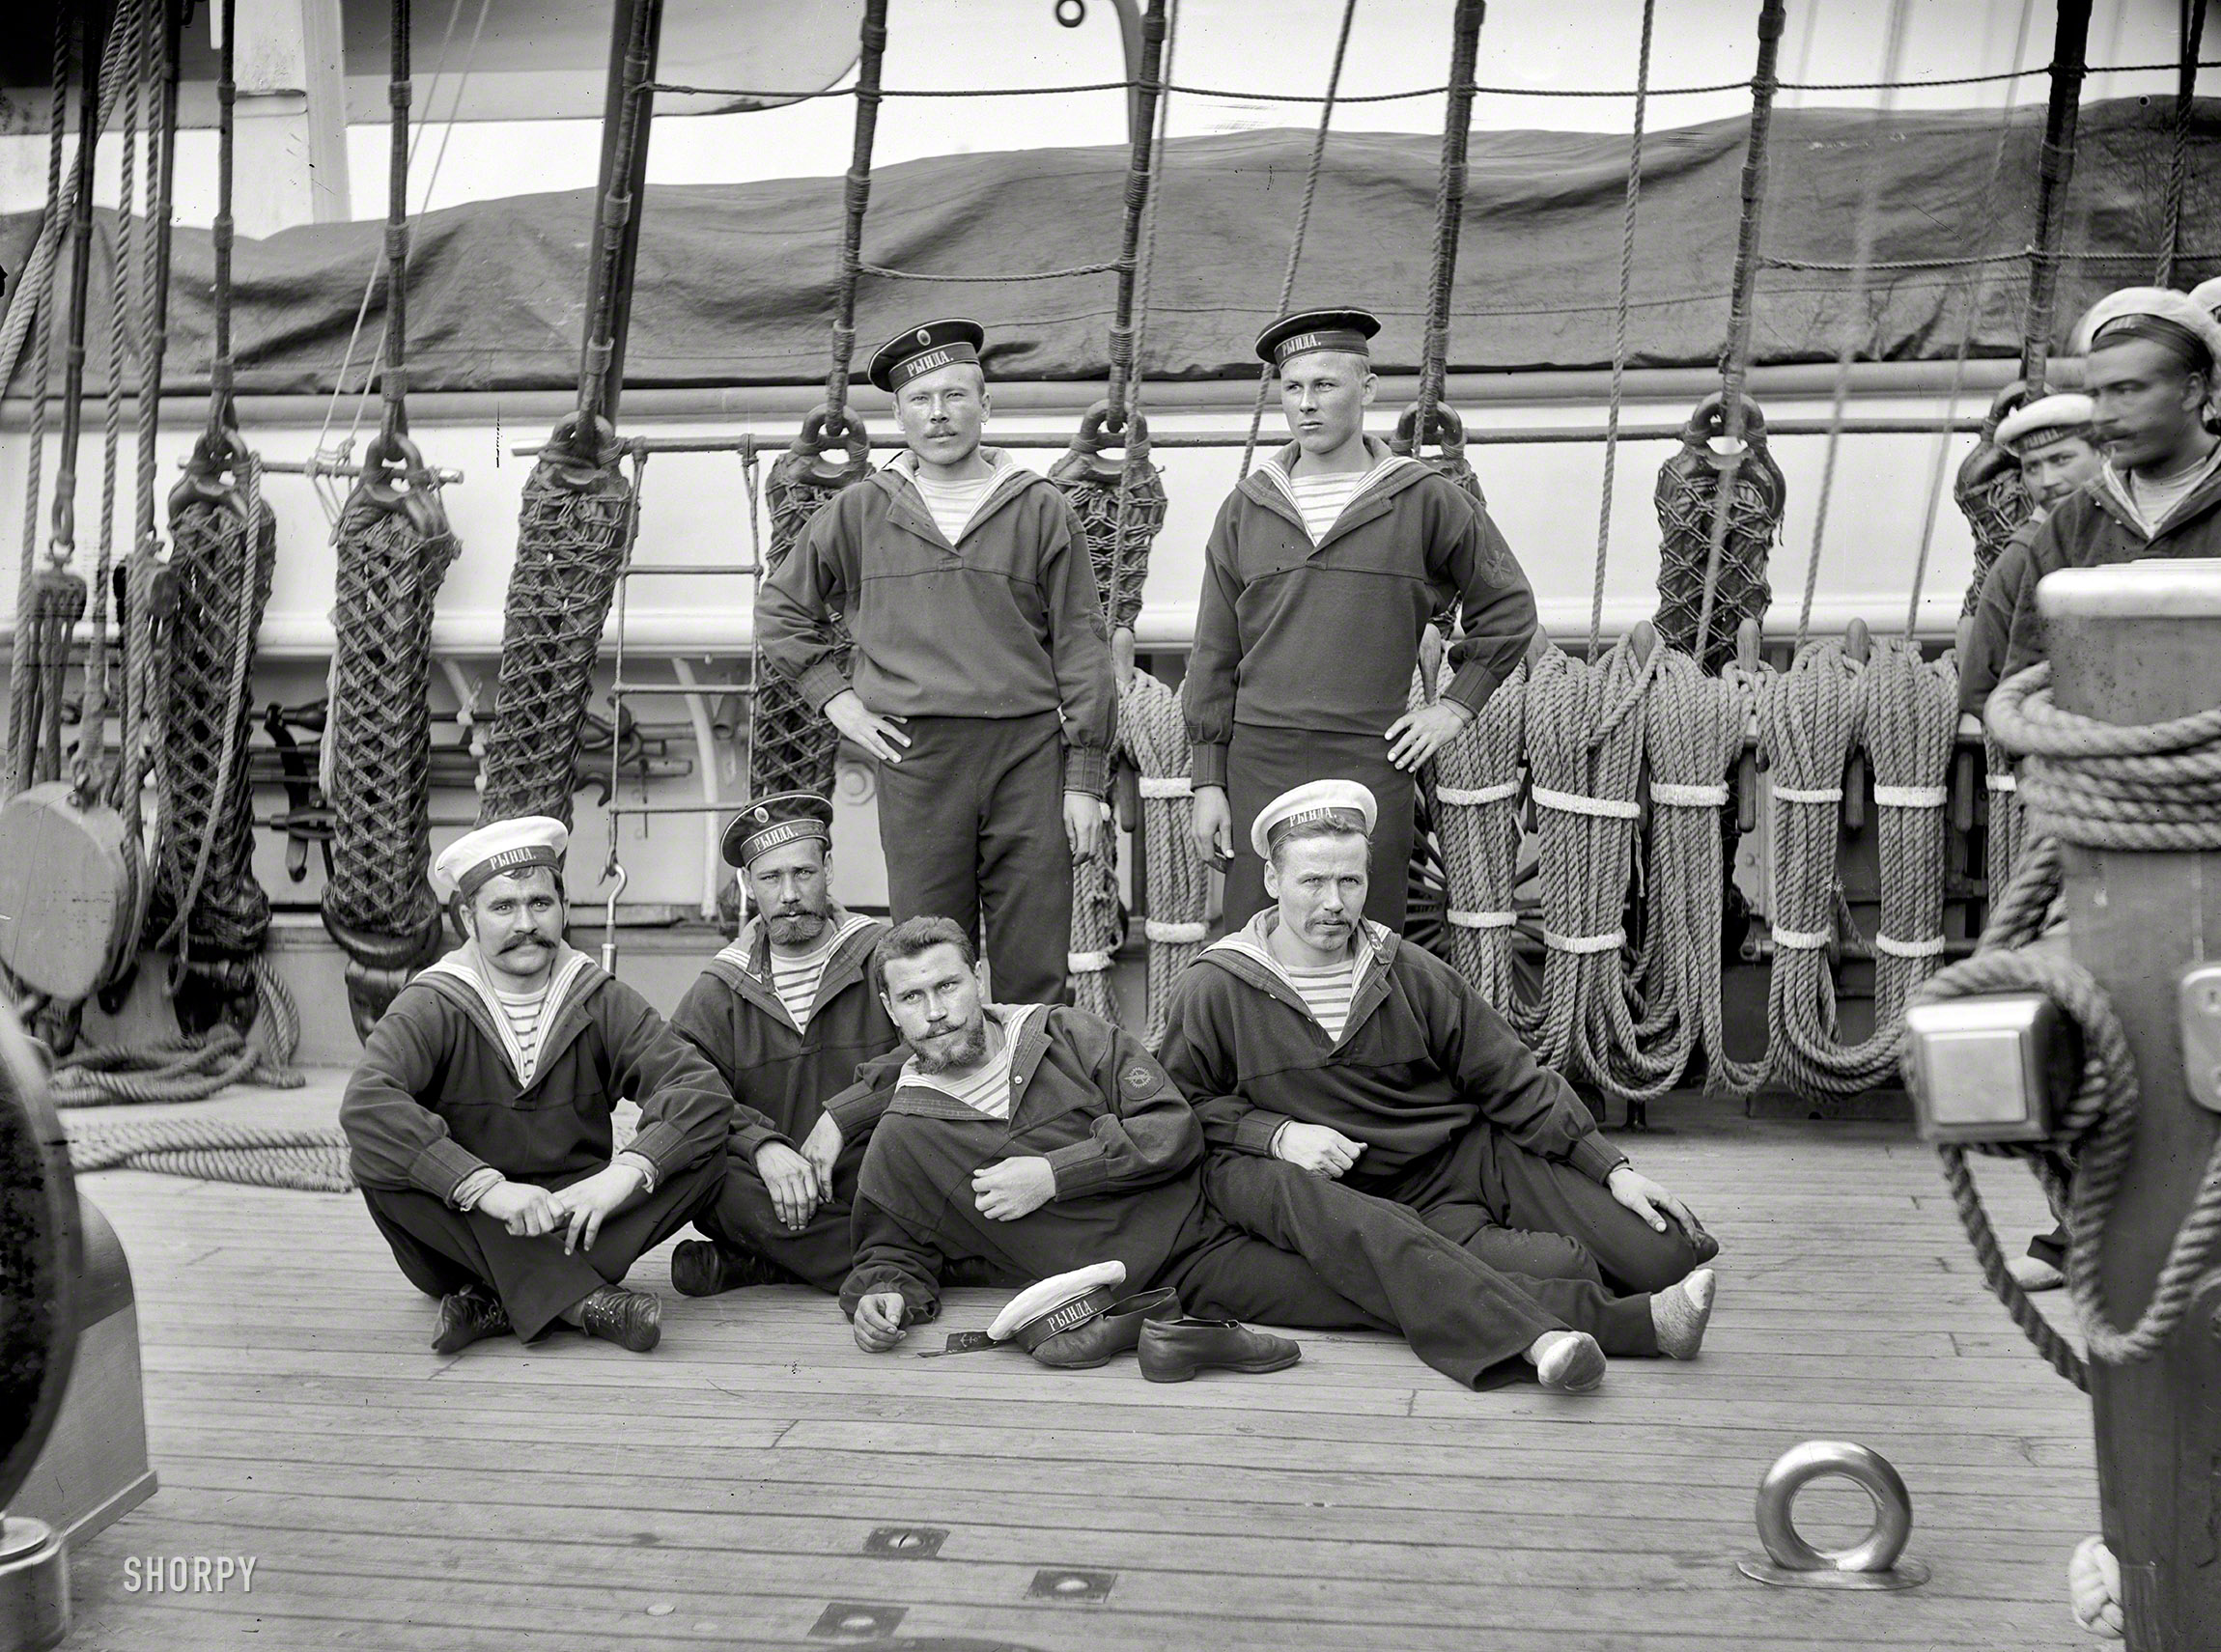 New York, 1893. "Columbian Naval Review. Group of sailors, Imperial Russian Navy." 8x10 inch glass negative, Detroit Publishing Company. View full size.